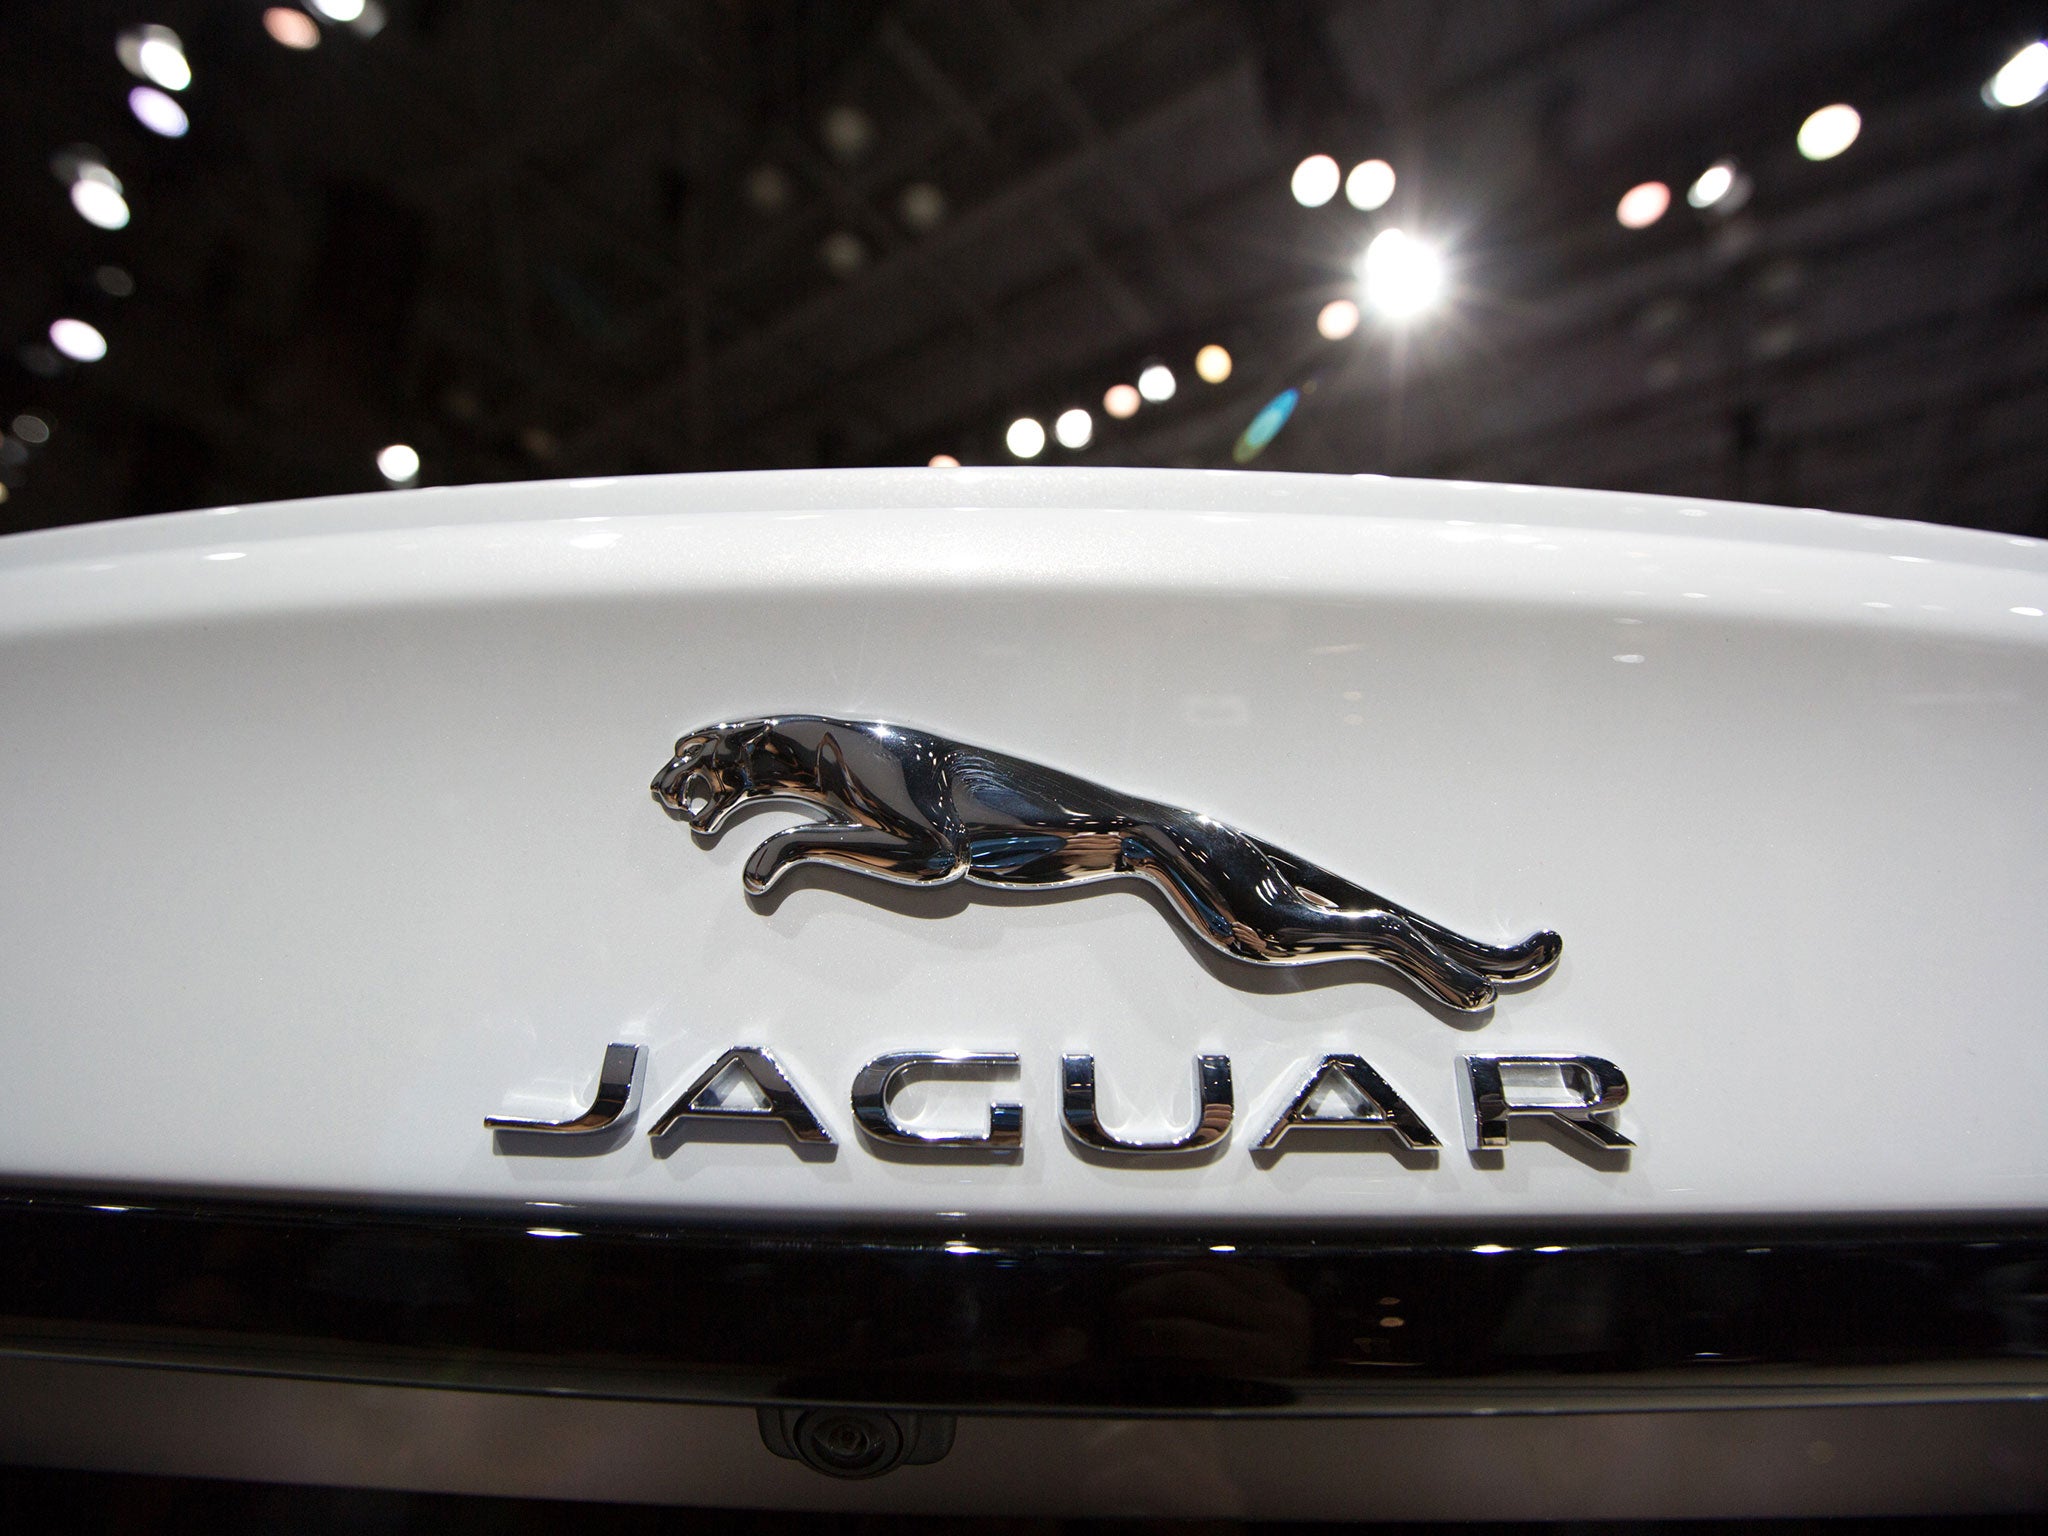 A detail of the exterior logo of the 2016 Jaguar XF as its introduced during press previews at the New York International Auto Show at the Javits Center on April 1, 2015 in New York City. The auto show opens to the public April 3-12.